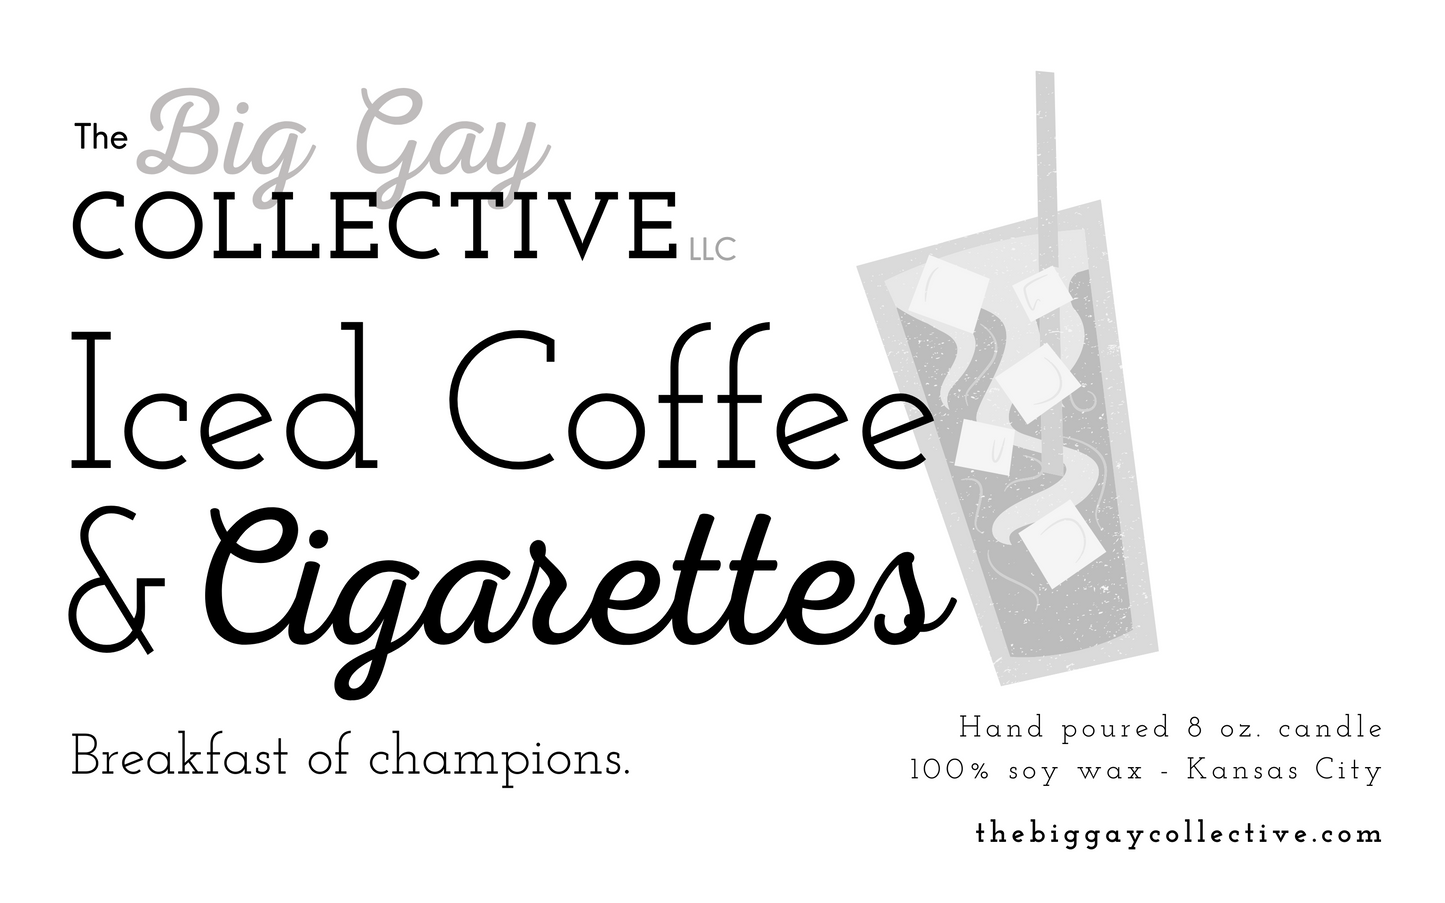 Iced Coffee & Cigarettes